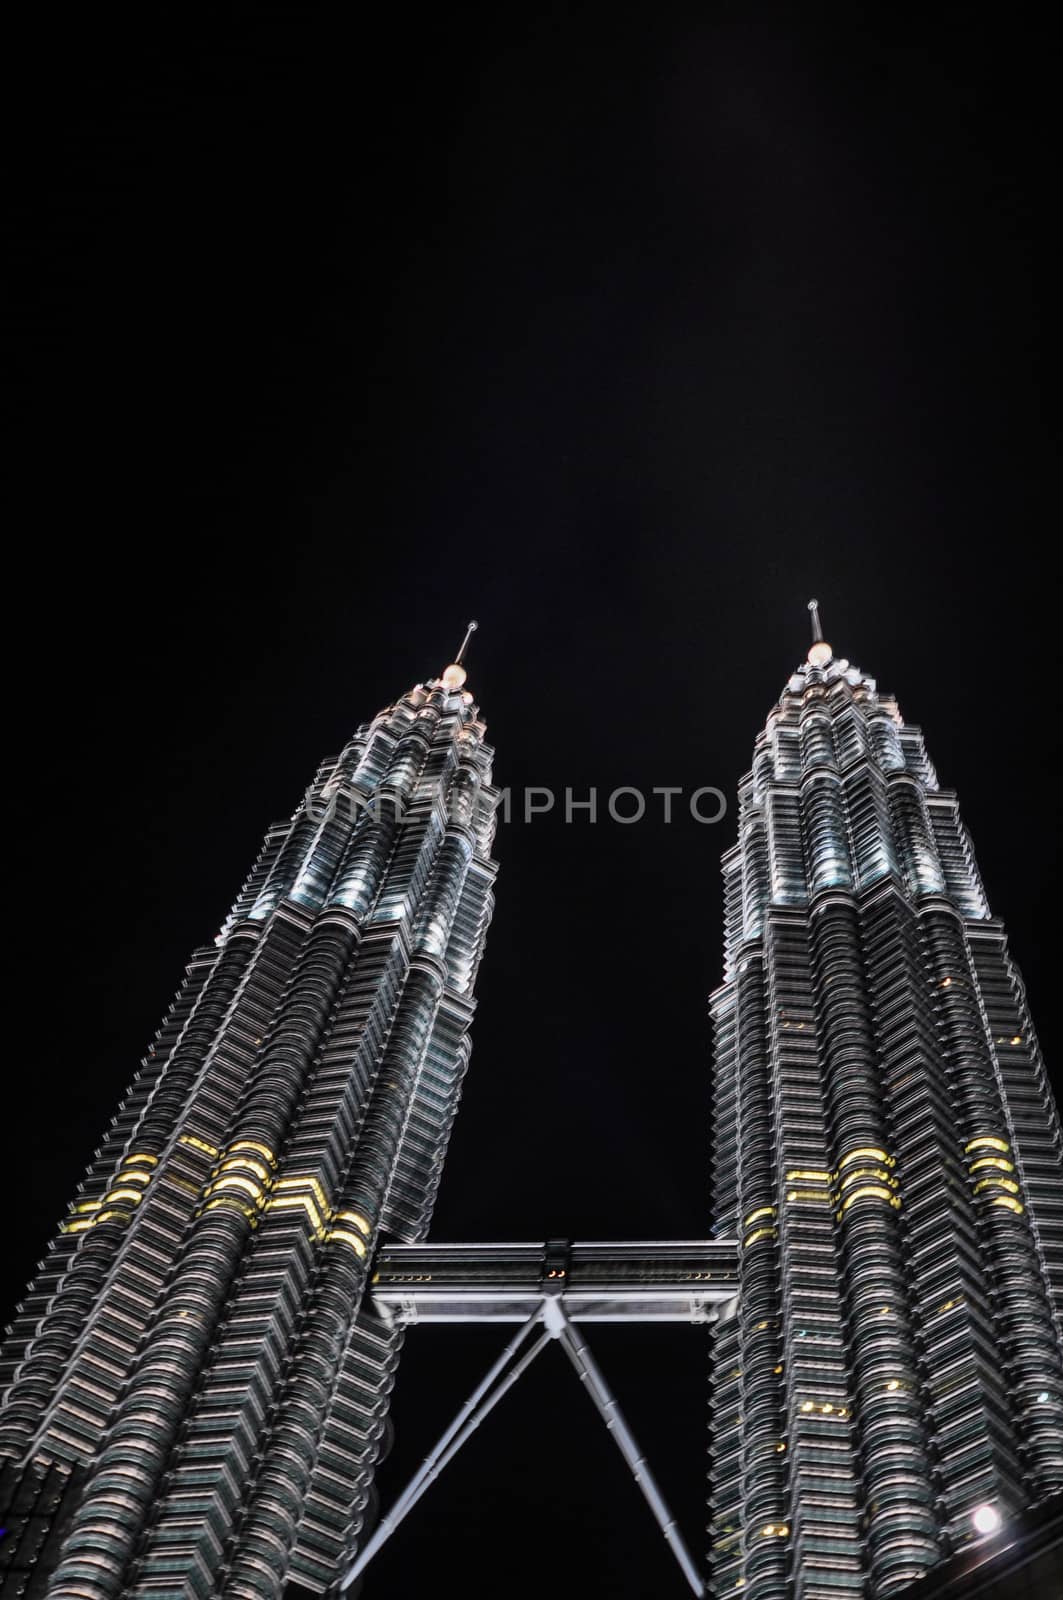 KUALA LUMPUR - APRIL 10: General view of Petronas Twin Towers at by weltreisendertj